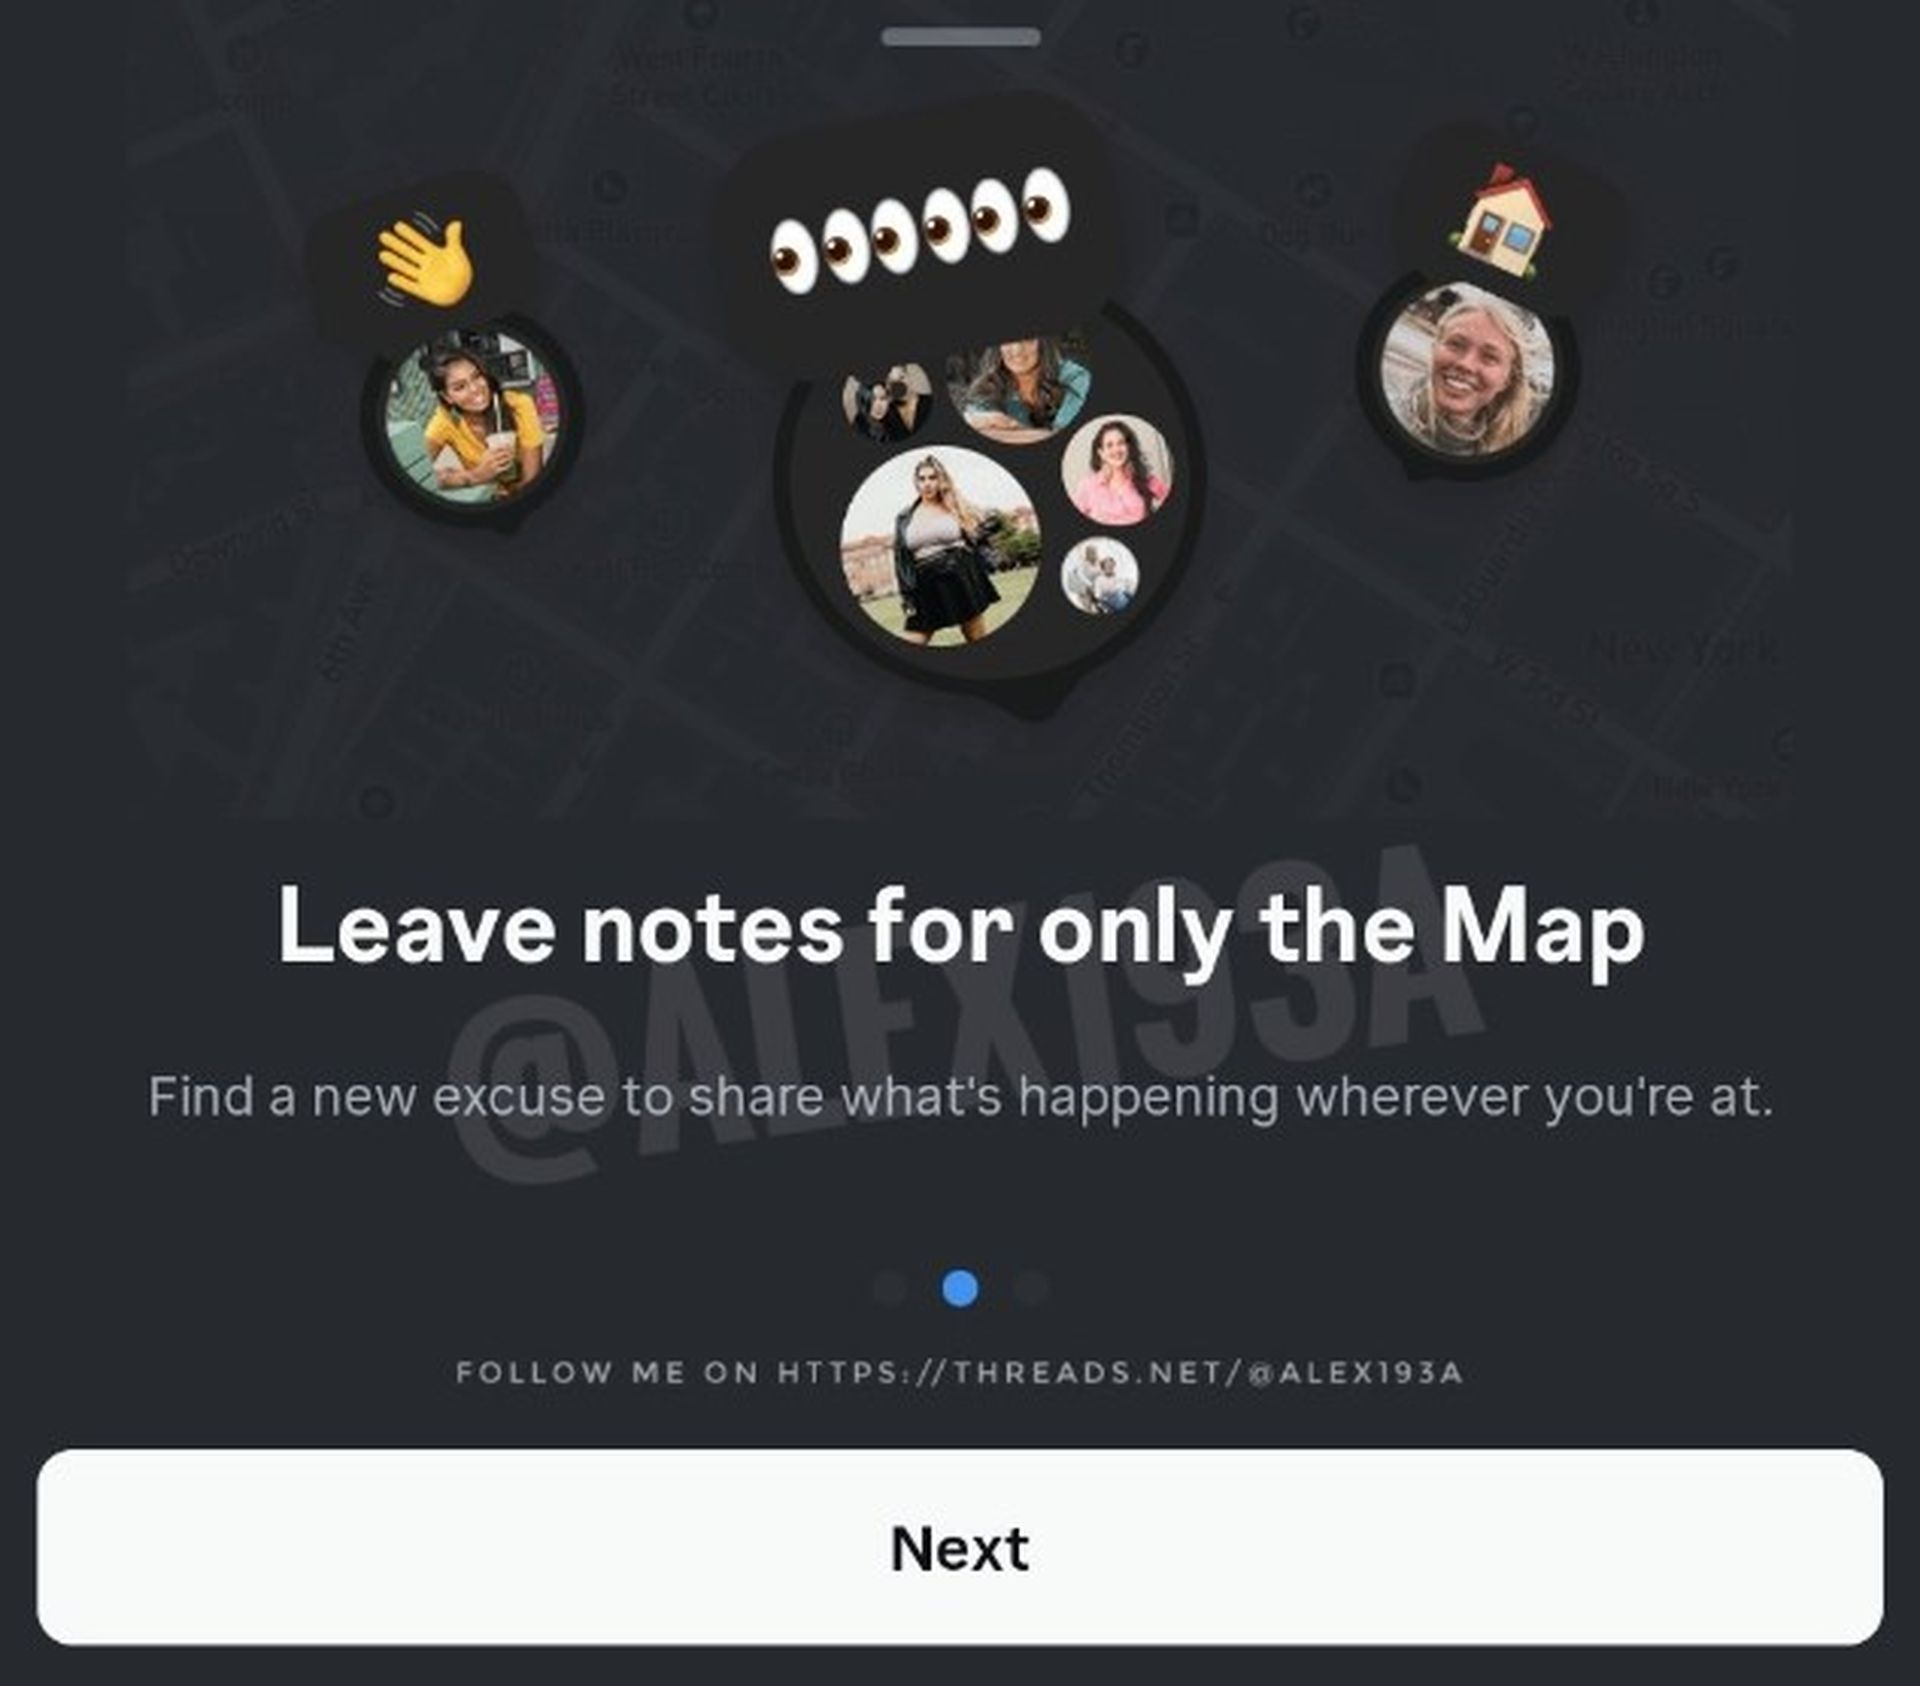 How will the Instagram Friend Map feature work?